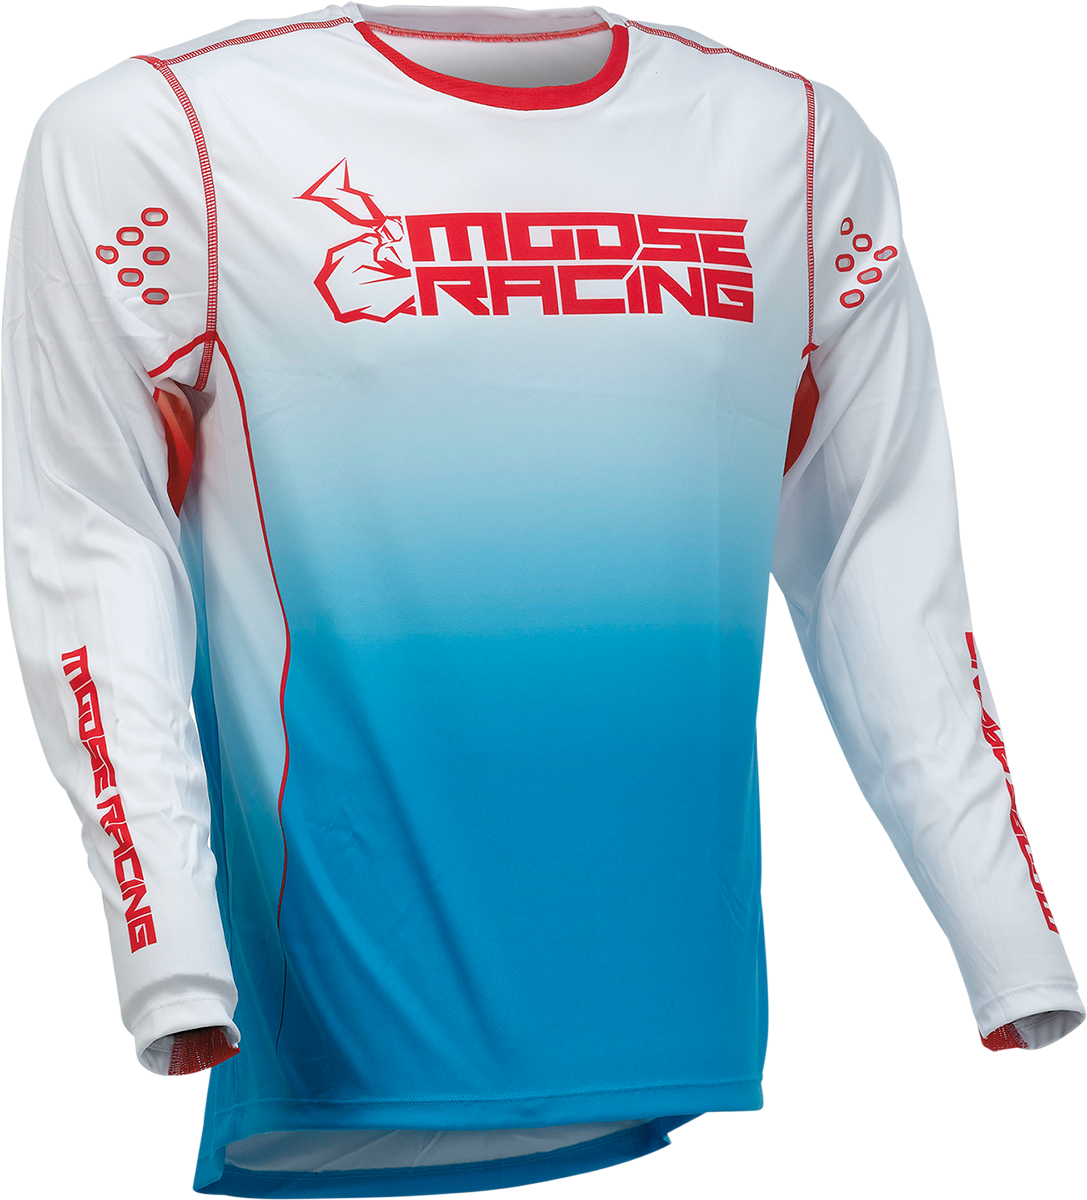 MOOSE RACING Agroid Jersey - Red/White/Blue - 2XL 2910-6992